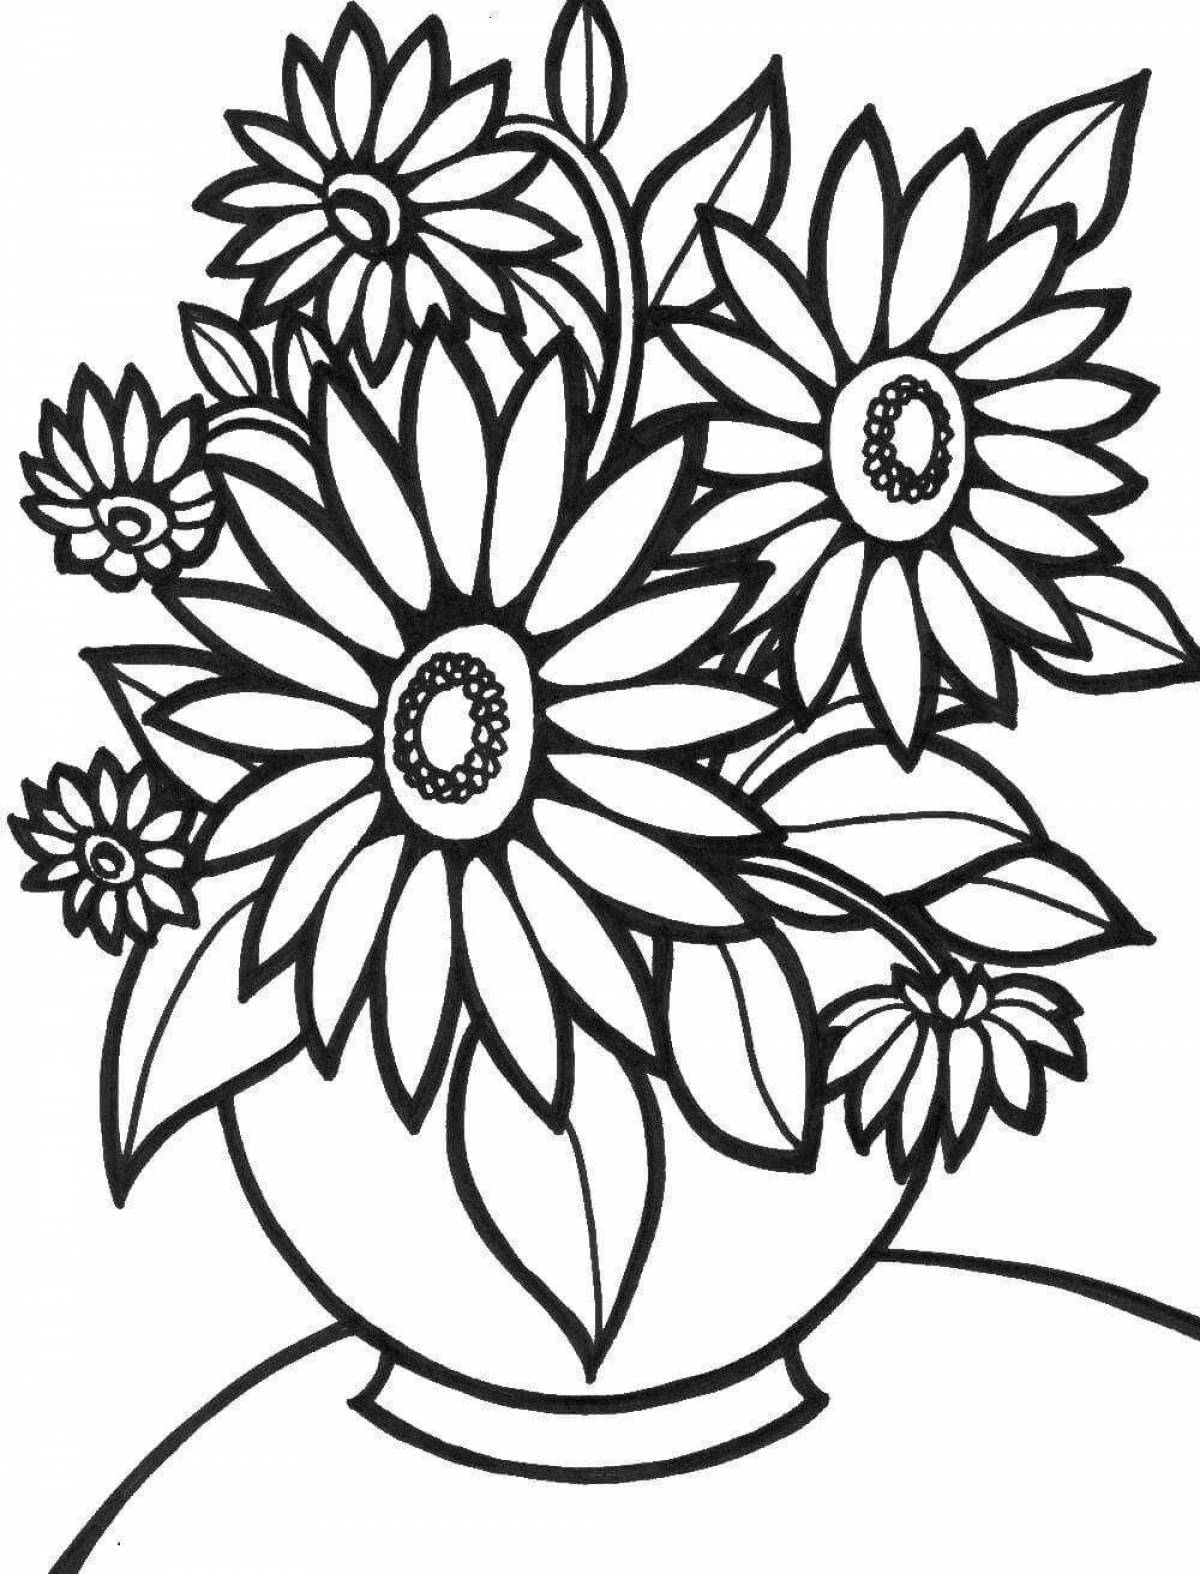 Charming coloring book in different colors